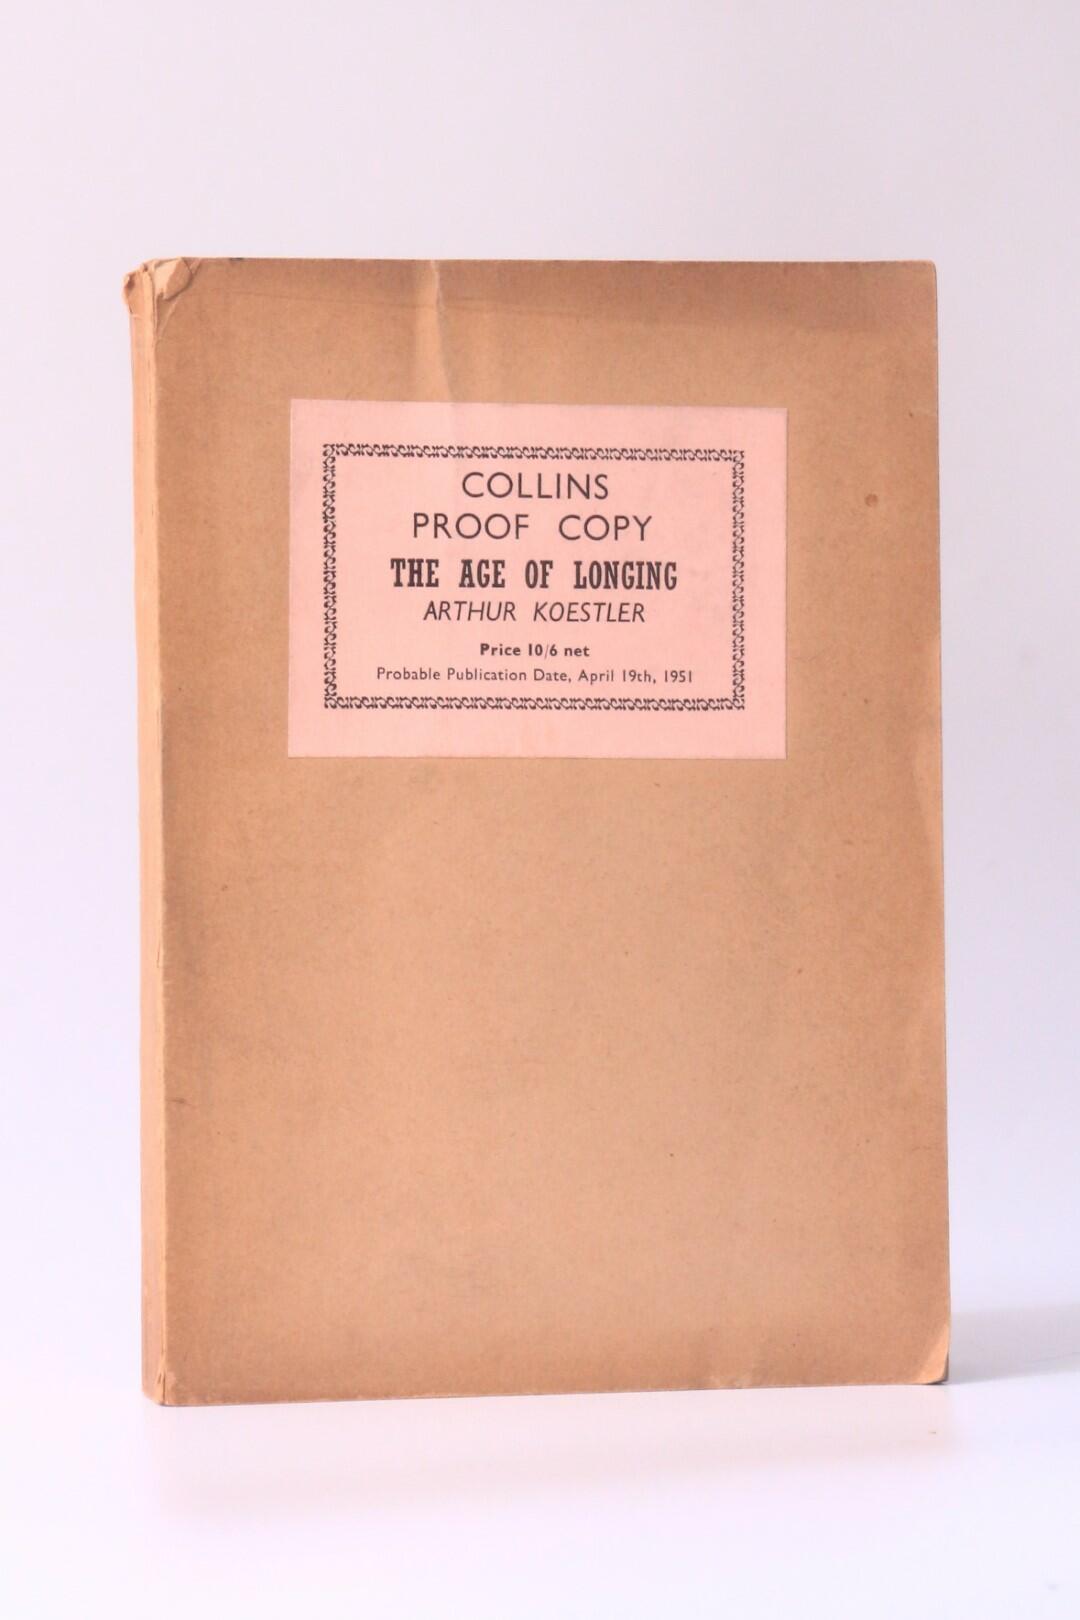 Arthur Koestler - The Age of Longing - Collins, 1951, Proof.